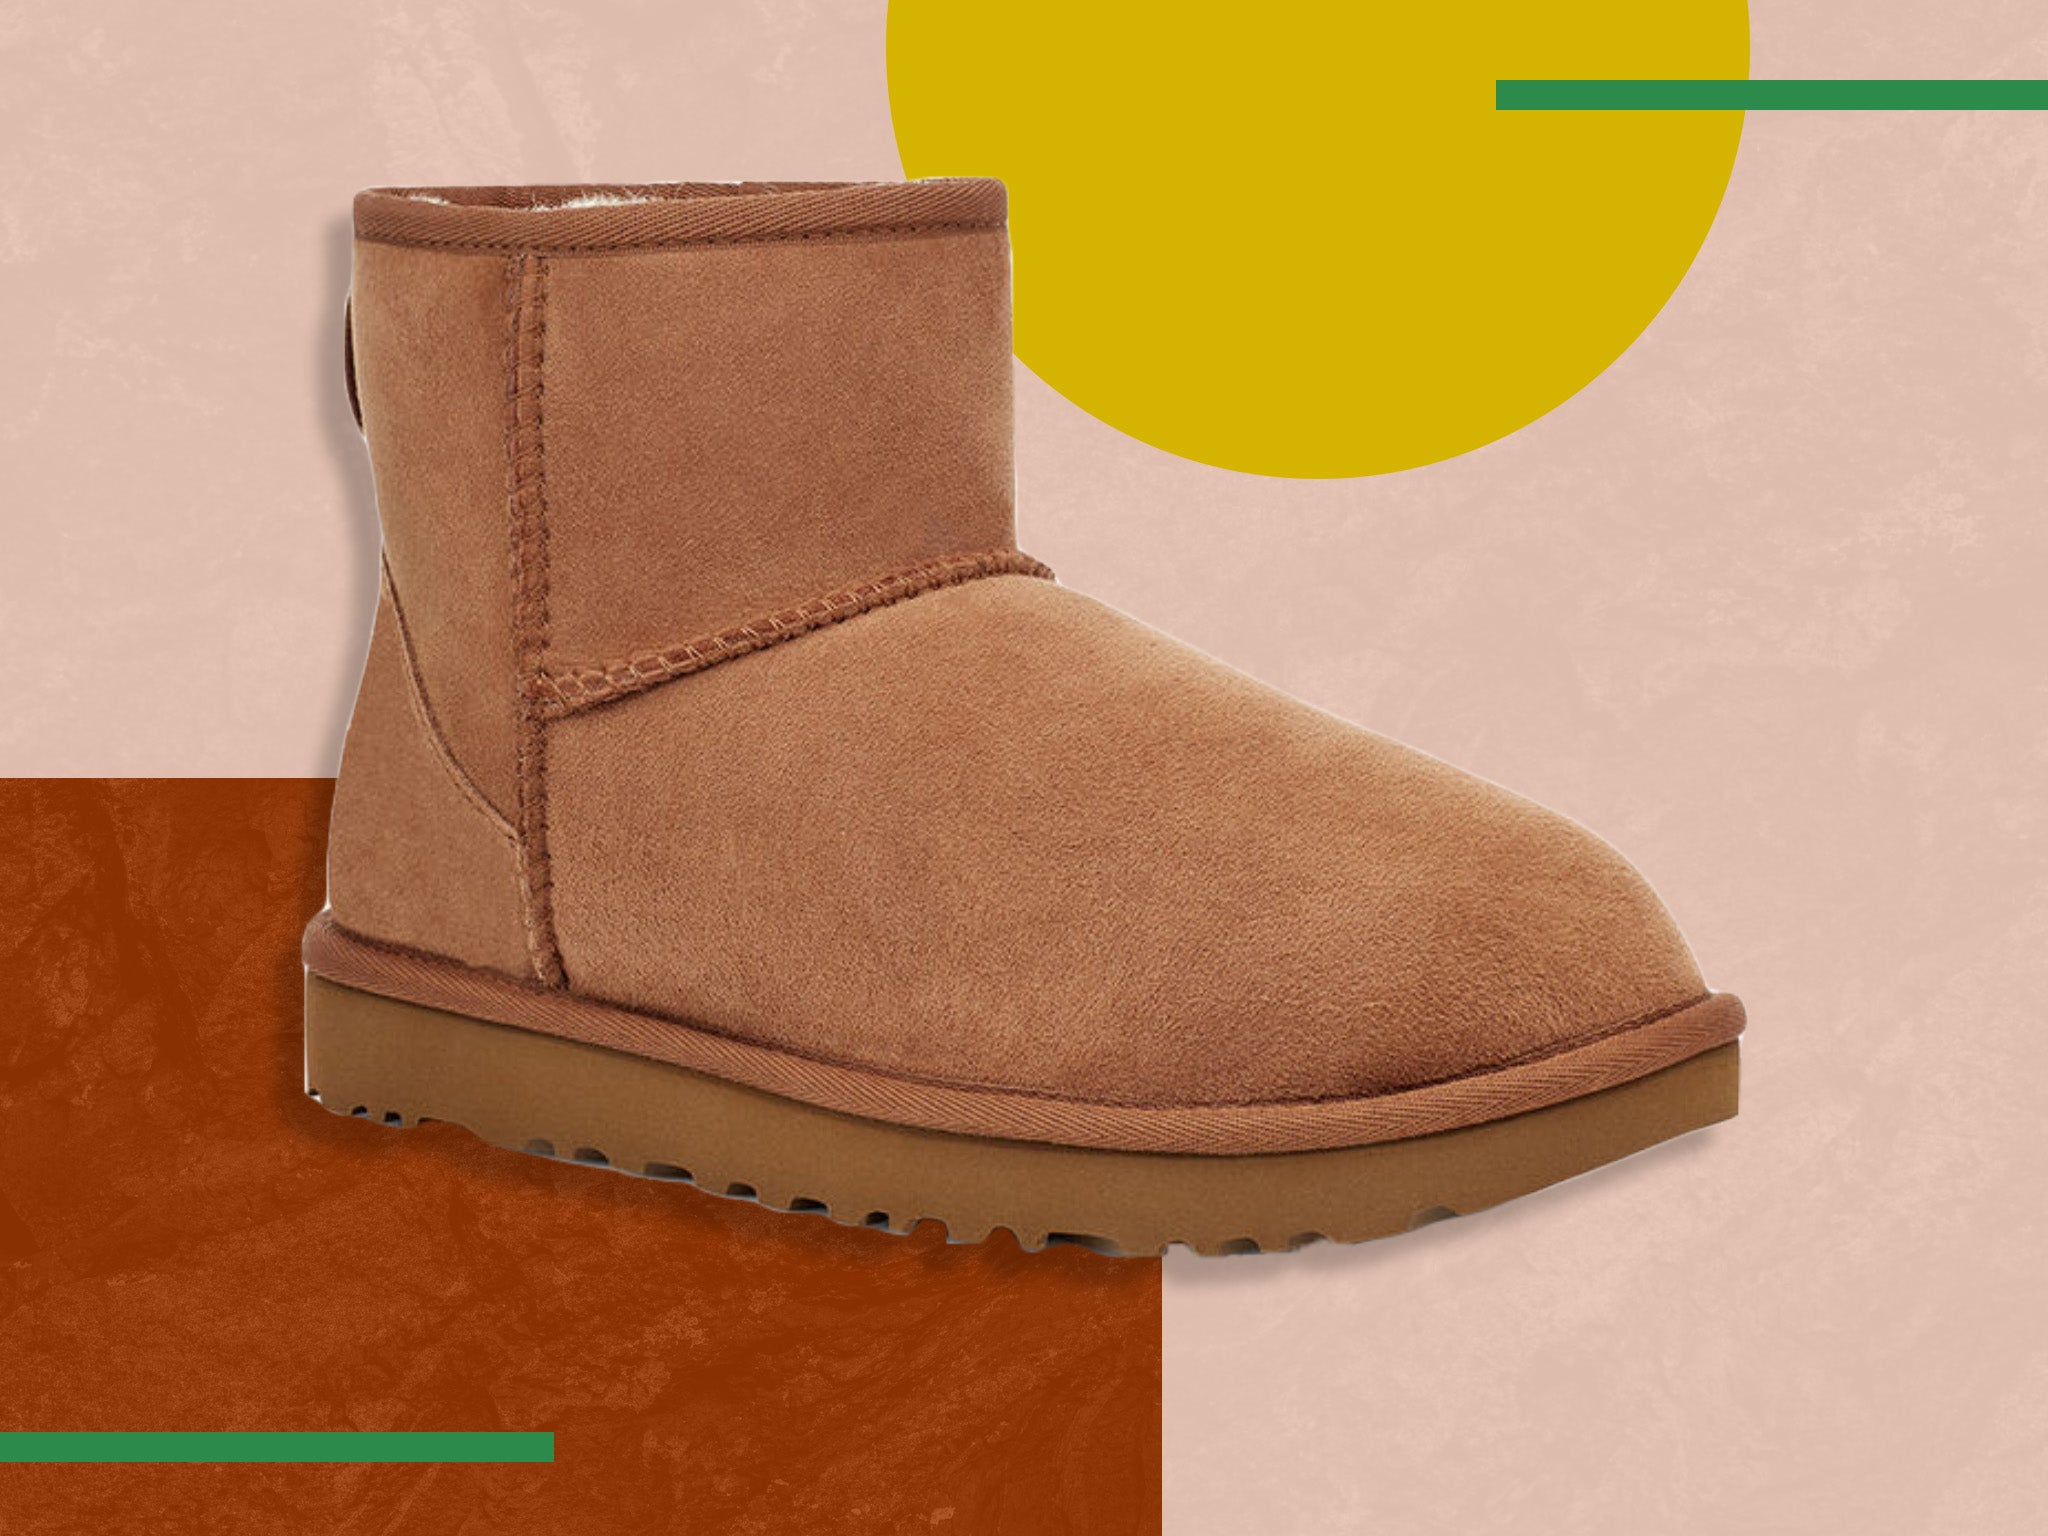 This isn’t the first time M&S has dropped an Ugg dupe